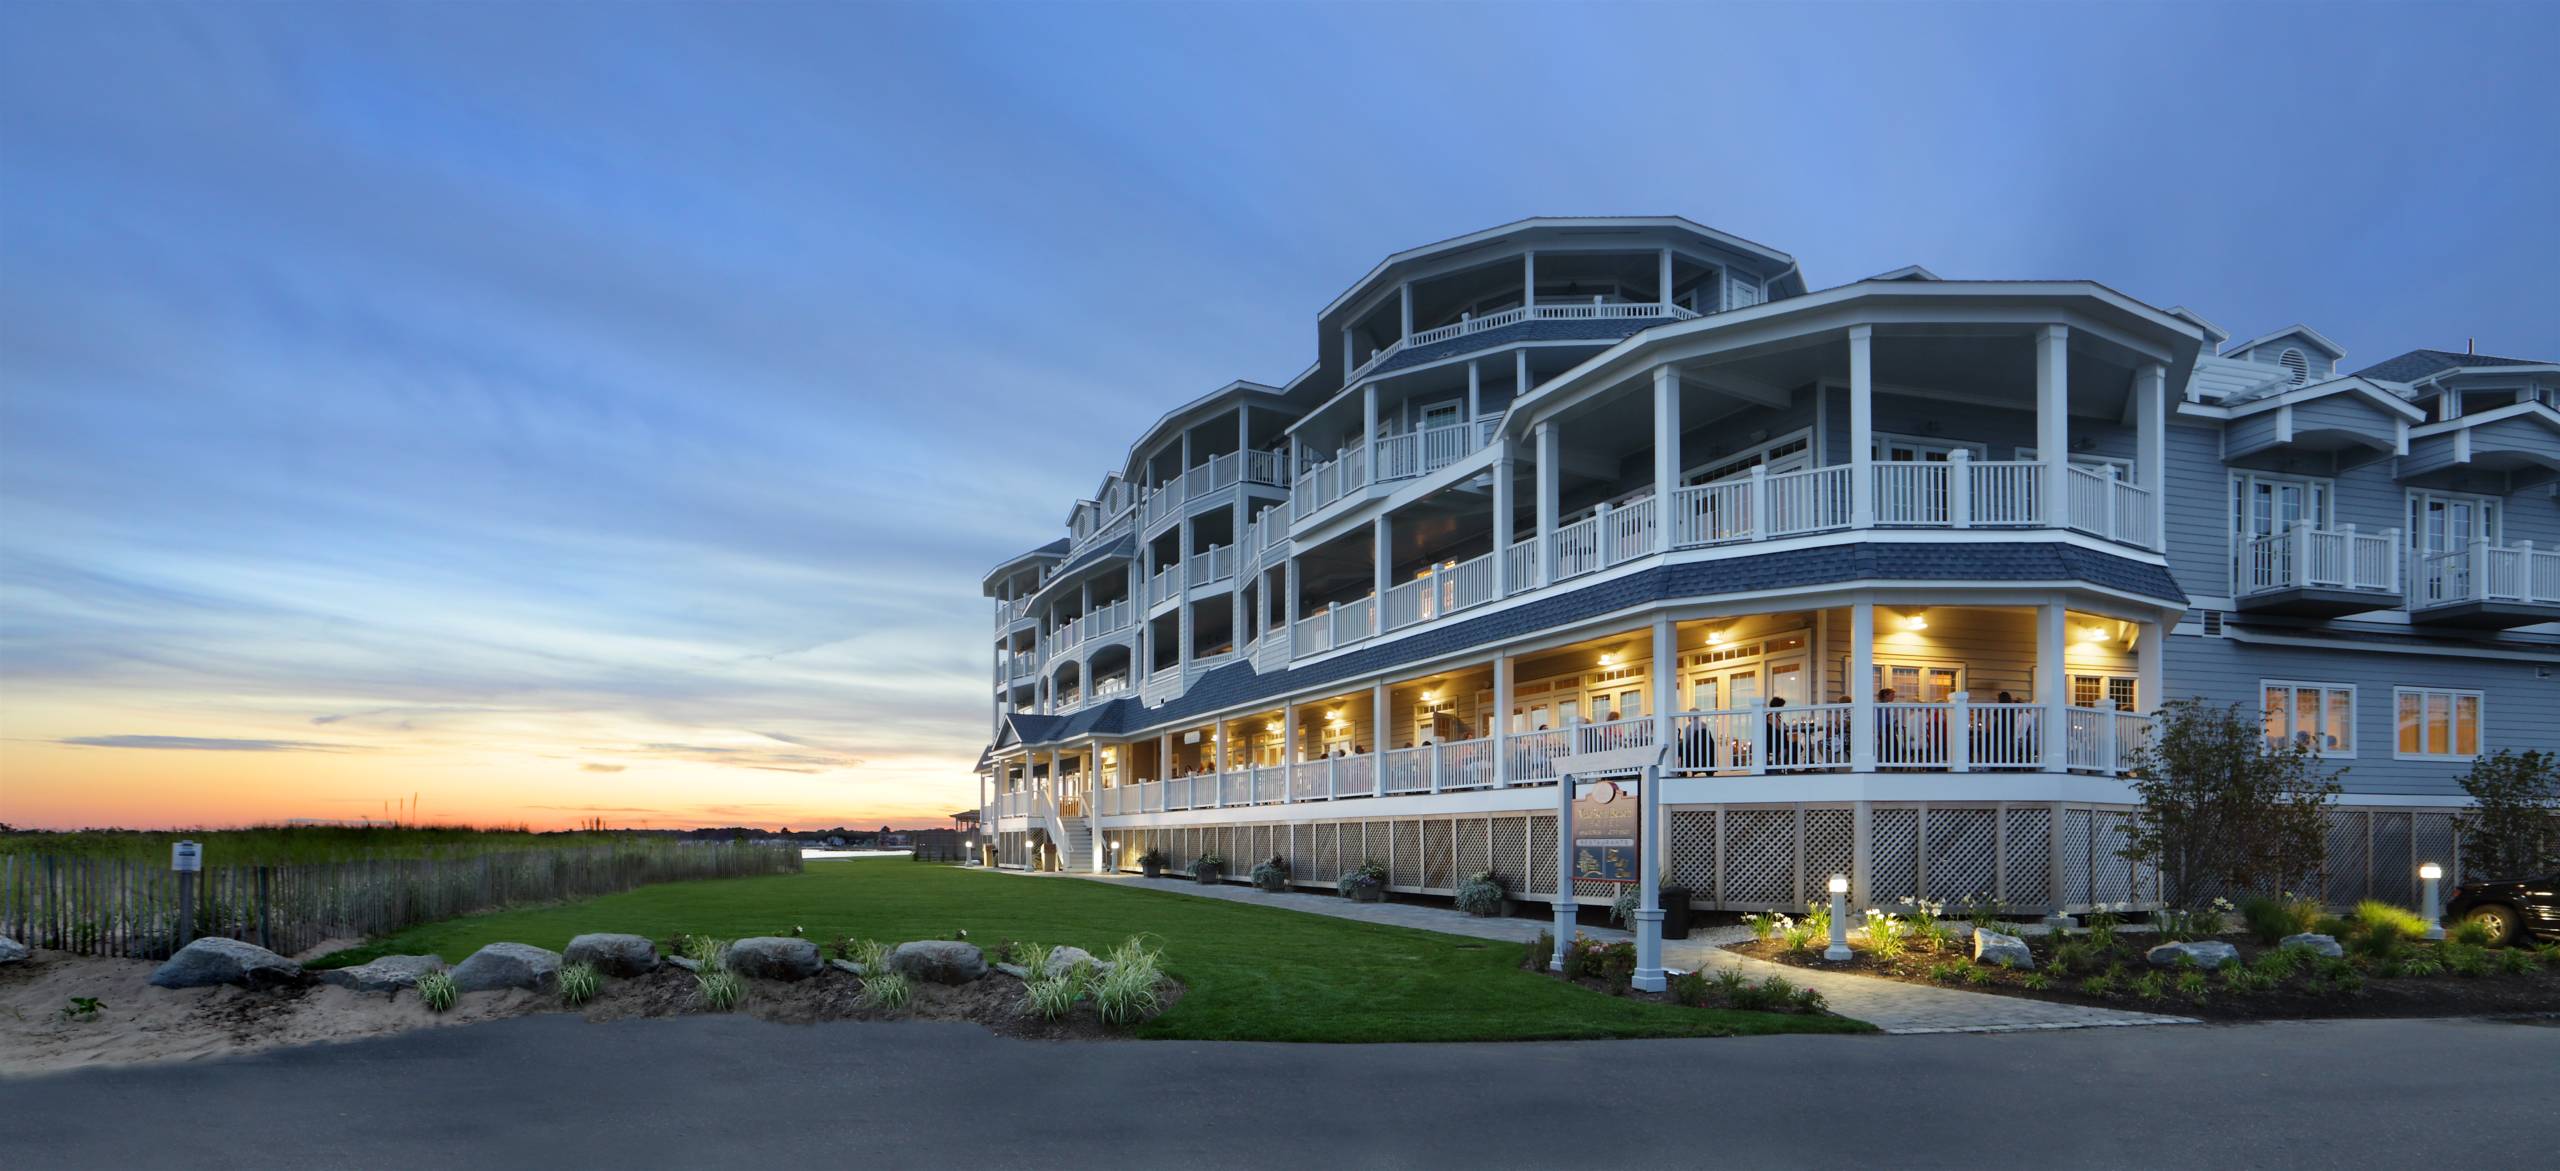 The exterior of the Madison Beach Hotel, a Curio Collection property in Connecticut